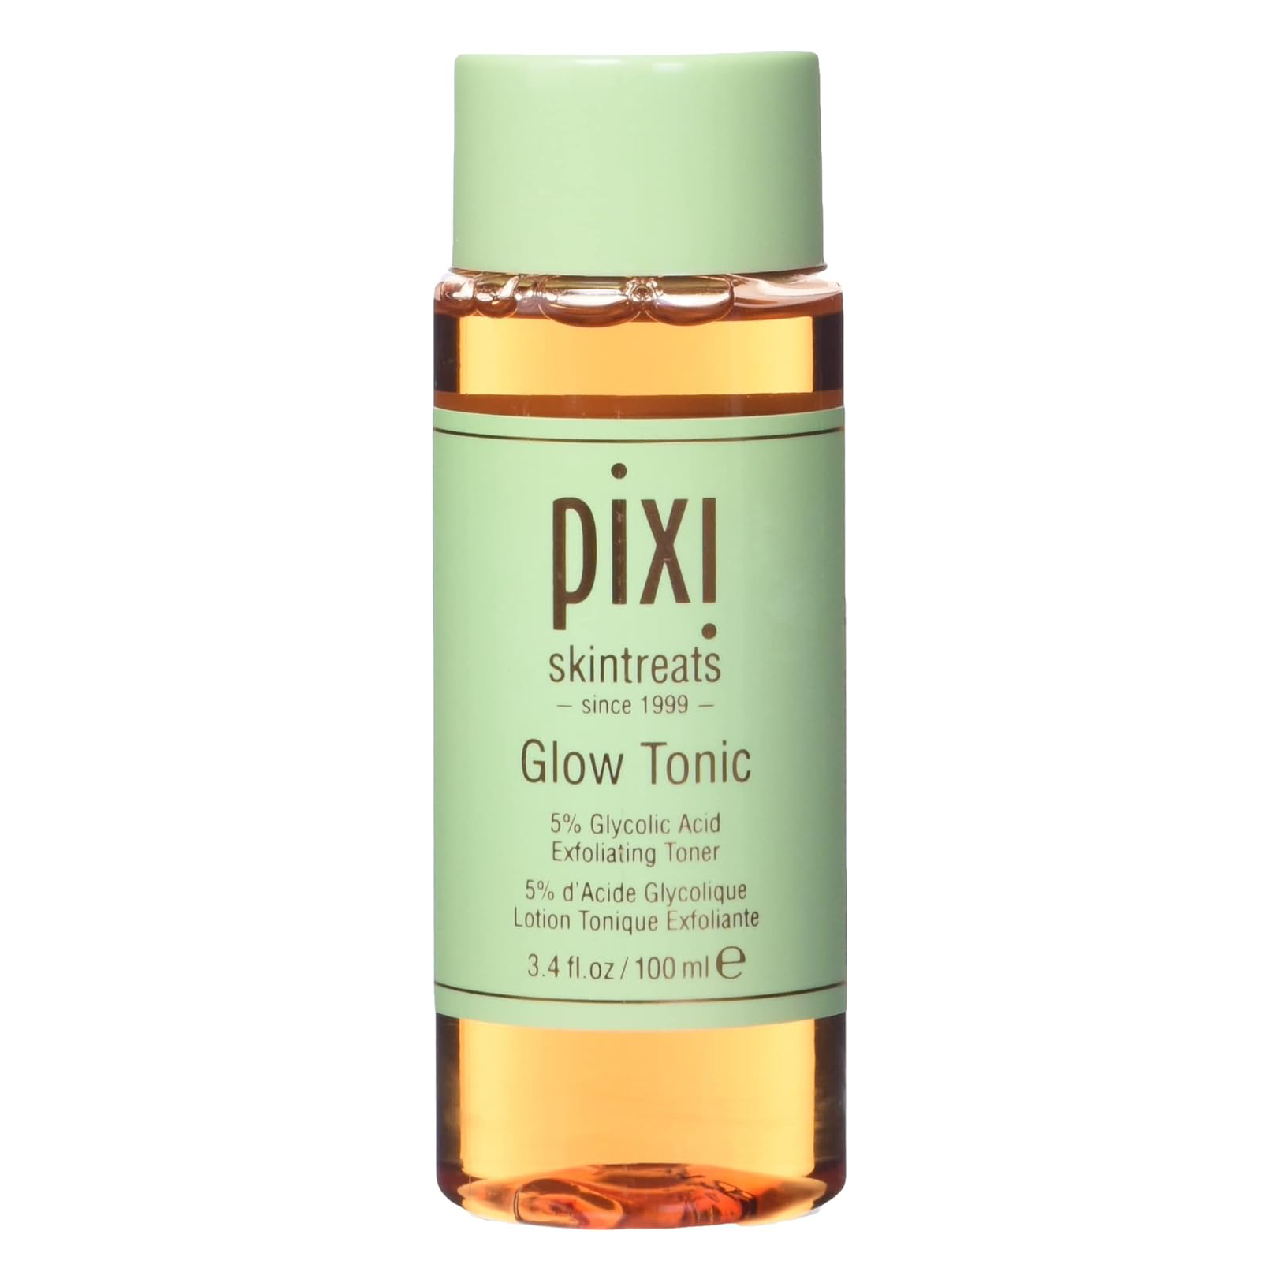 Bottle of Pixi Glow Tonic against a white background